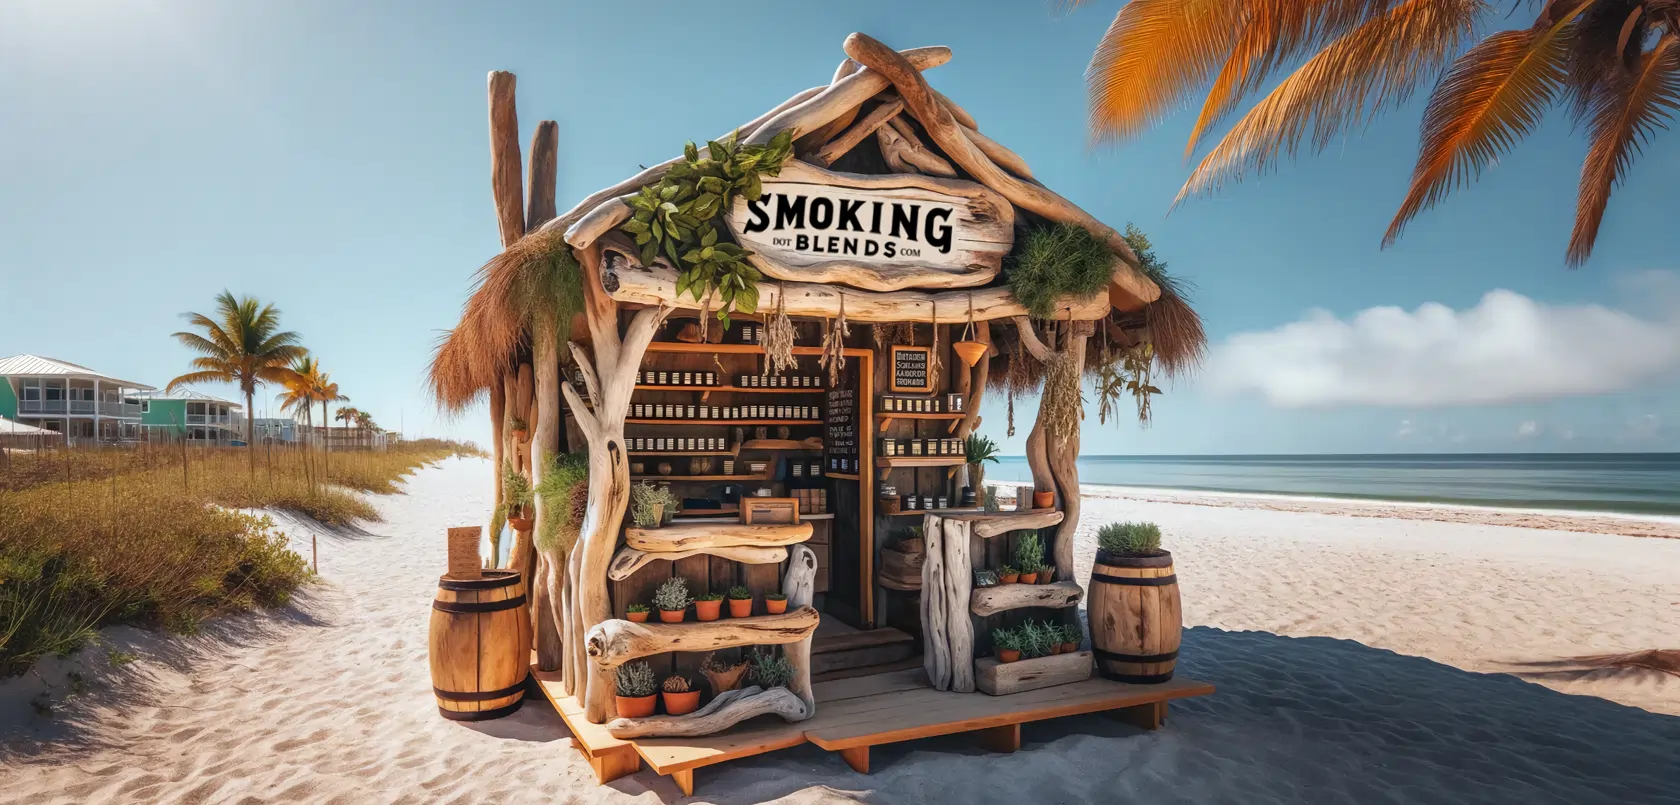 Small Herb Shop On the Beach